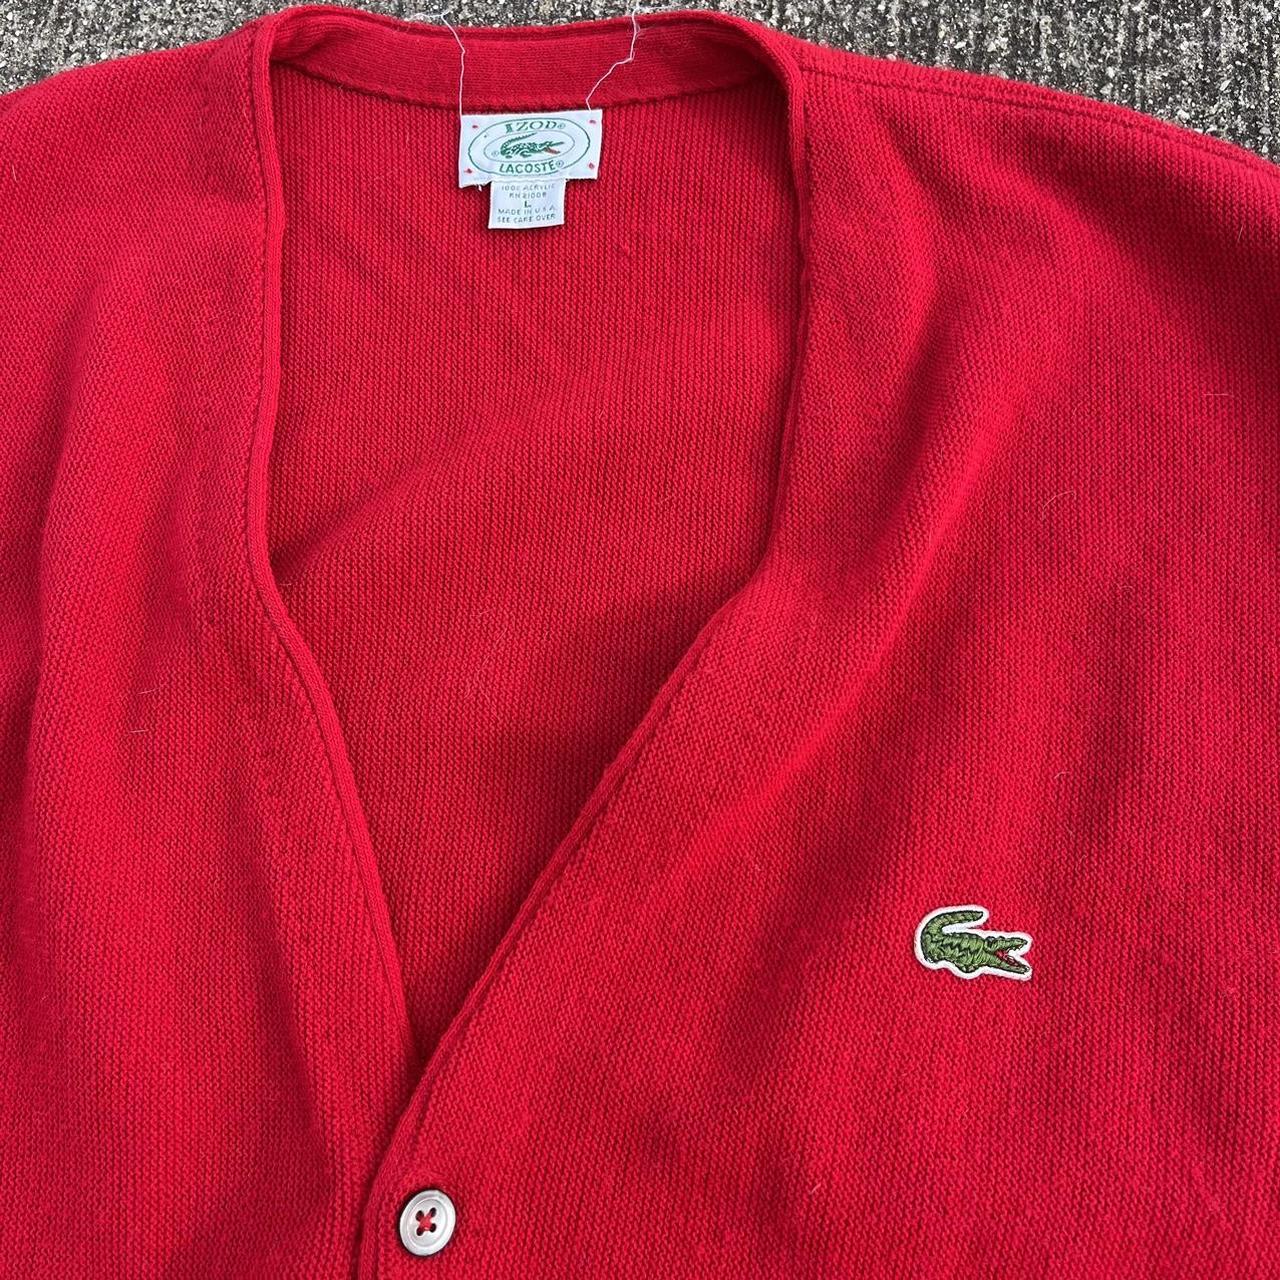 90s Lacoste cardigan red made in usa - Depop